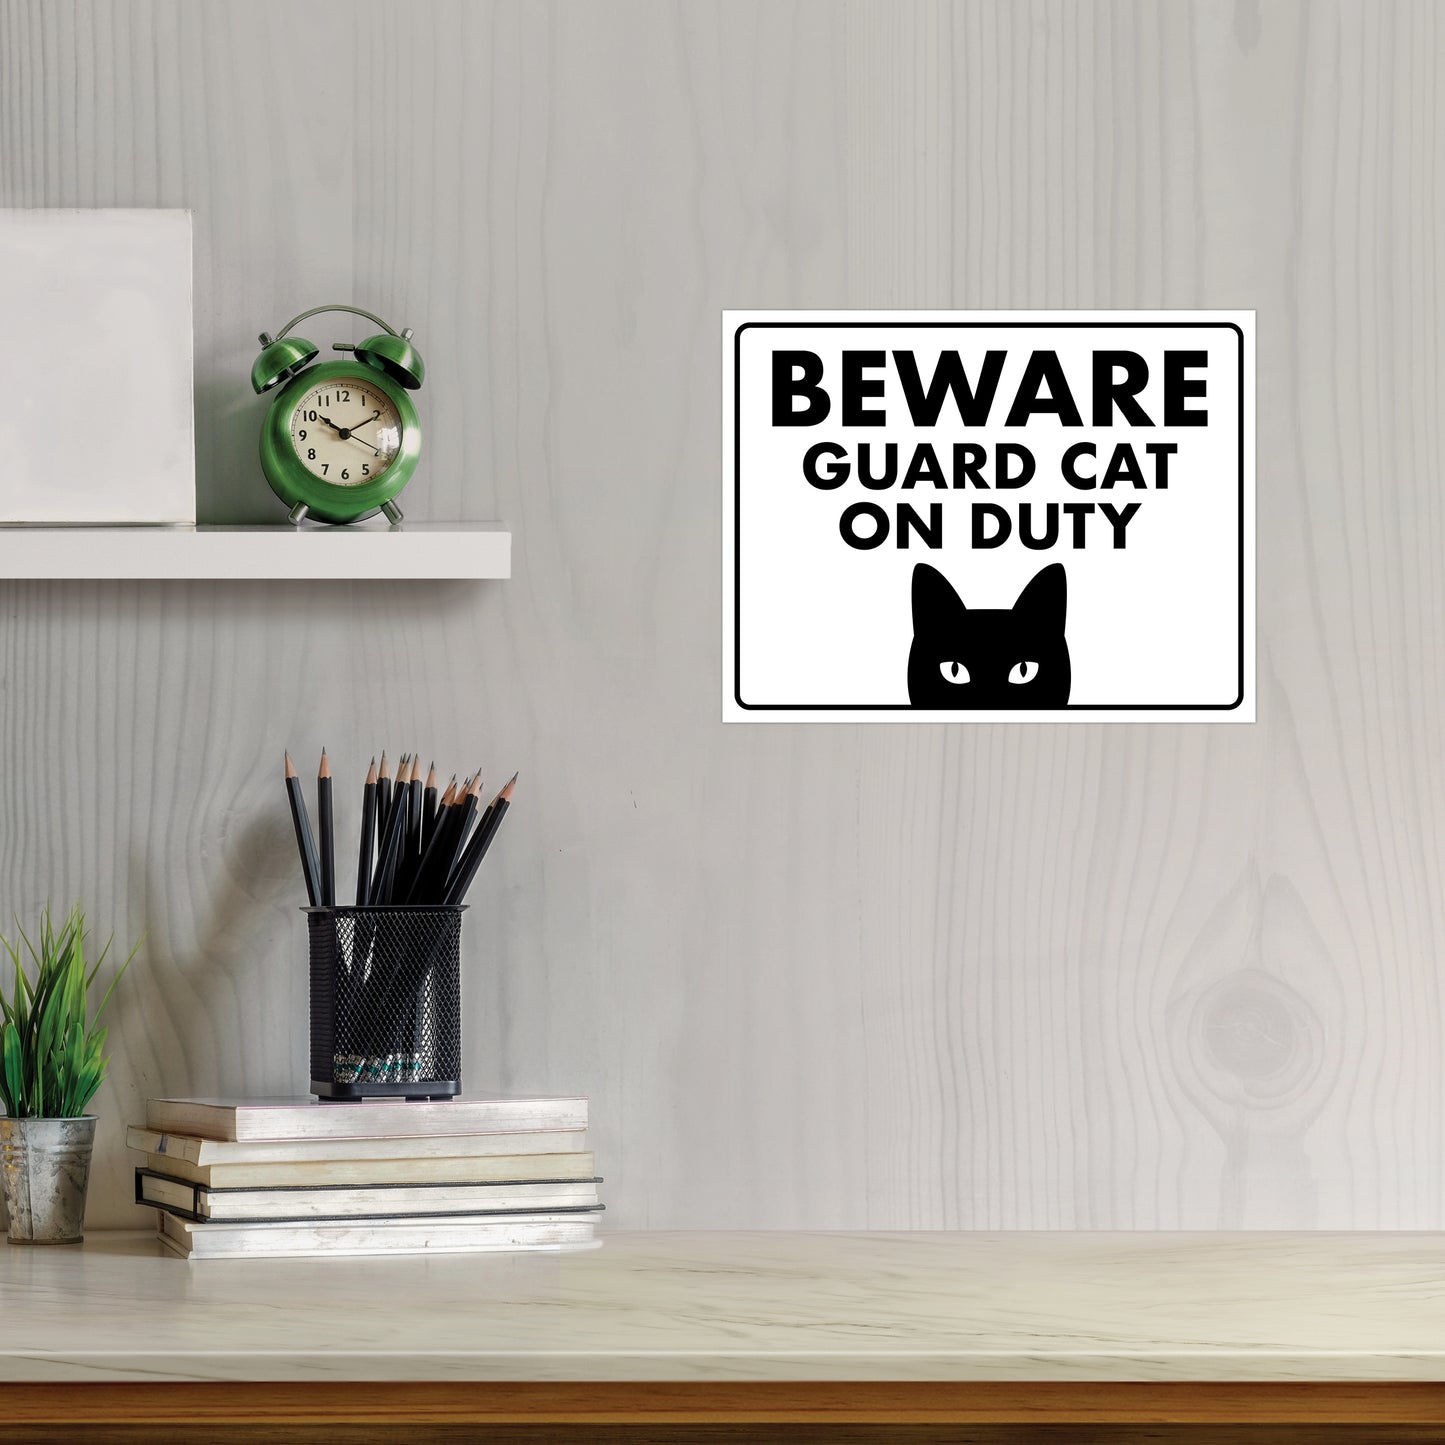 Beware, Guard Cat on Duty - 8.5" x 11" Funny Laminated Sign